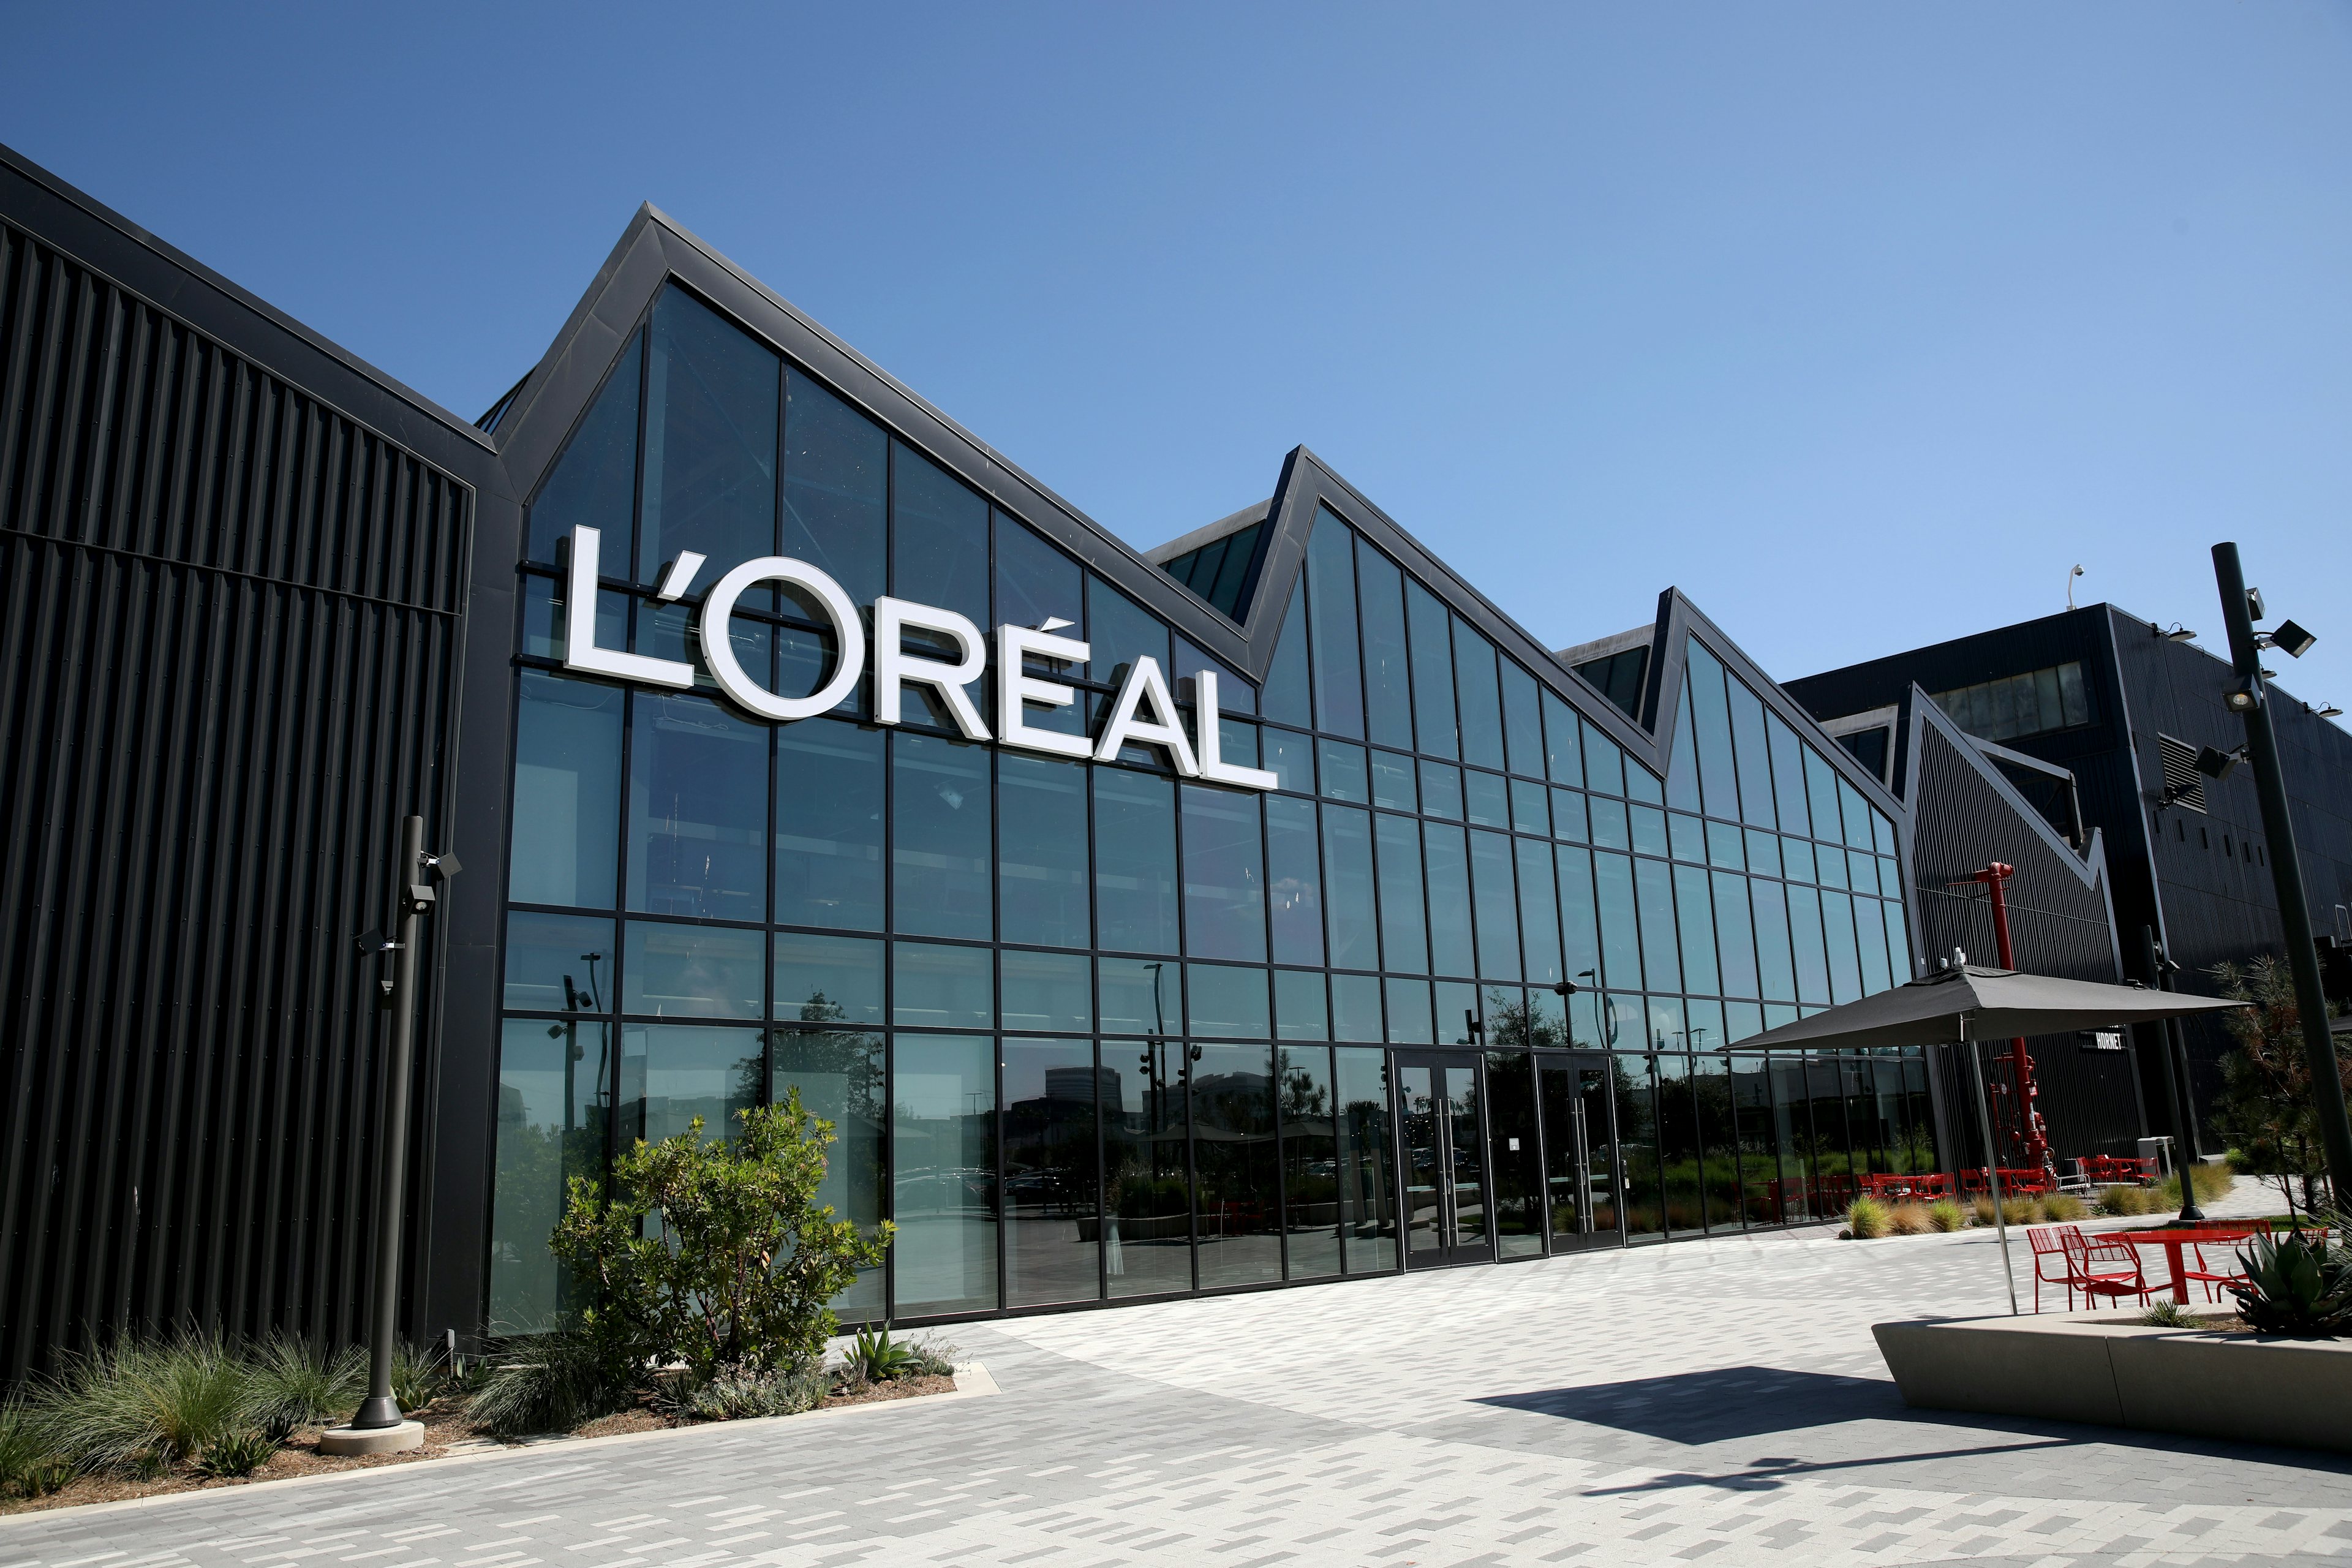 L’Oréal's second American headquarters in El Segundo, California. The L’Oréal Suzhou Intelligent Operation Center can process 50 million D2C orders per year. Photo: Getty Images